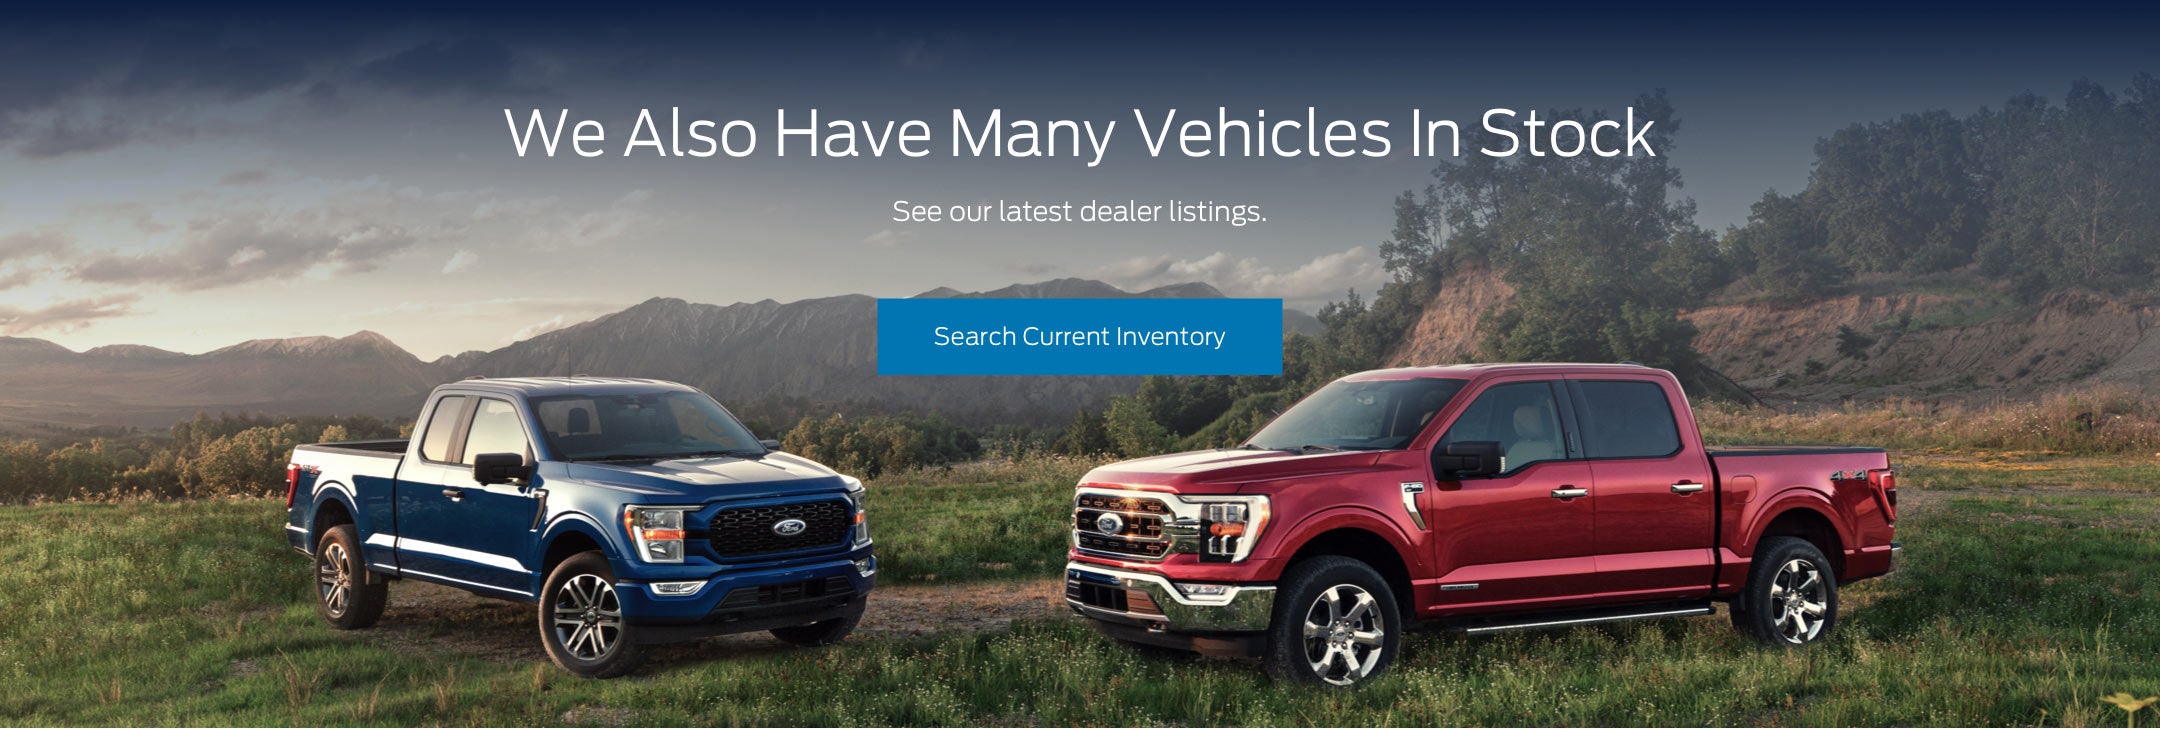 Ford vehicles in stock | Park Rapids Ford in Park Rapids MN